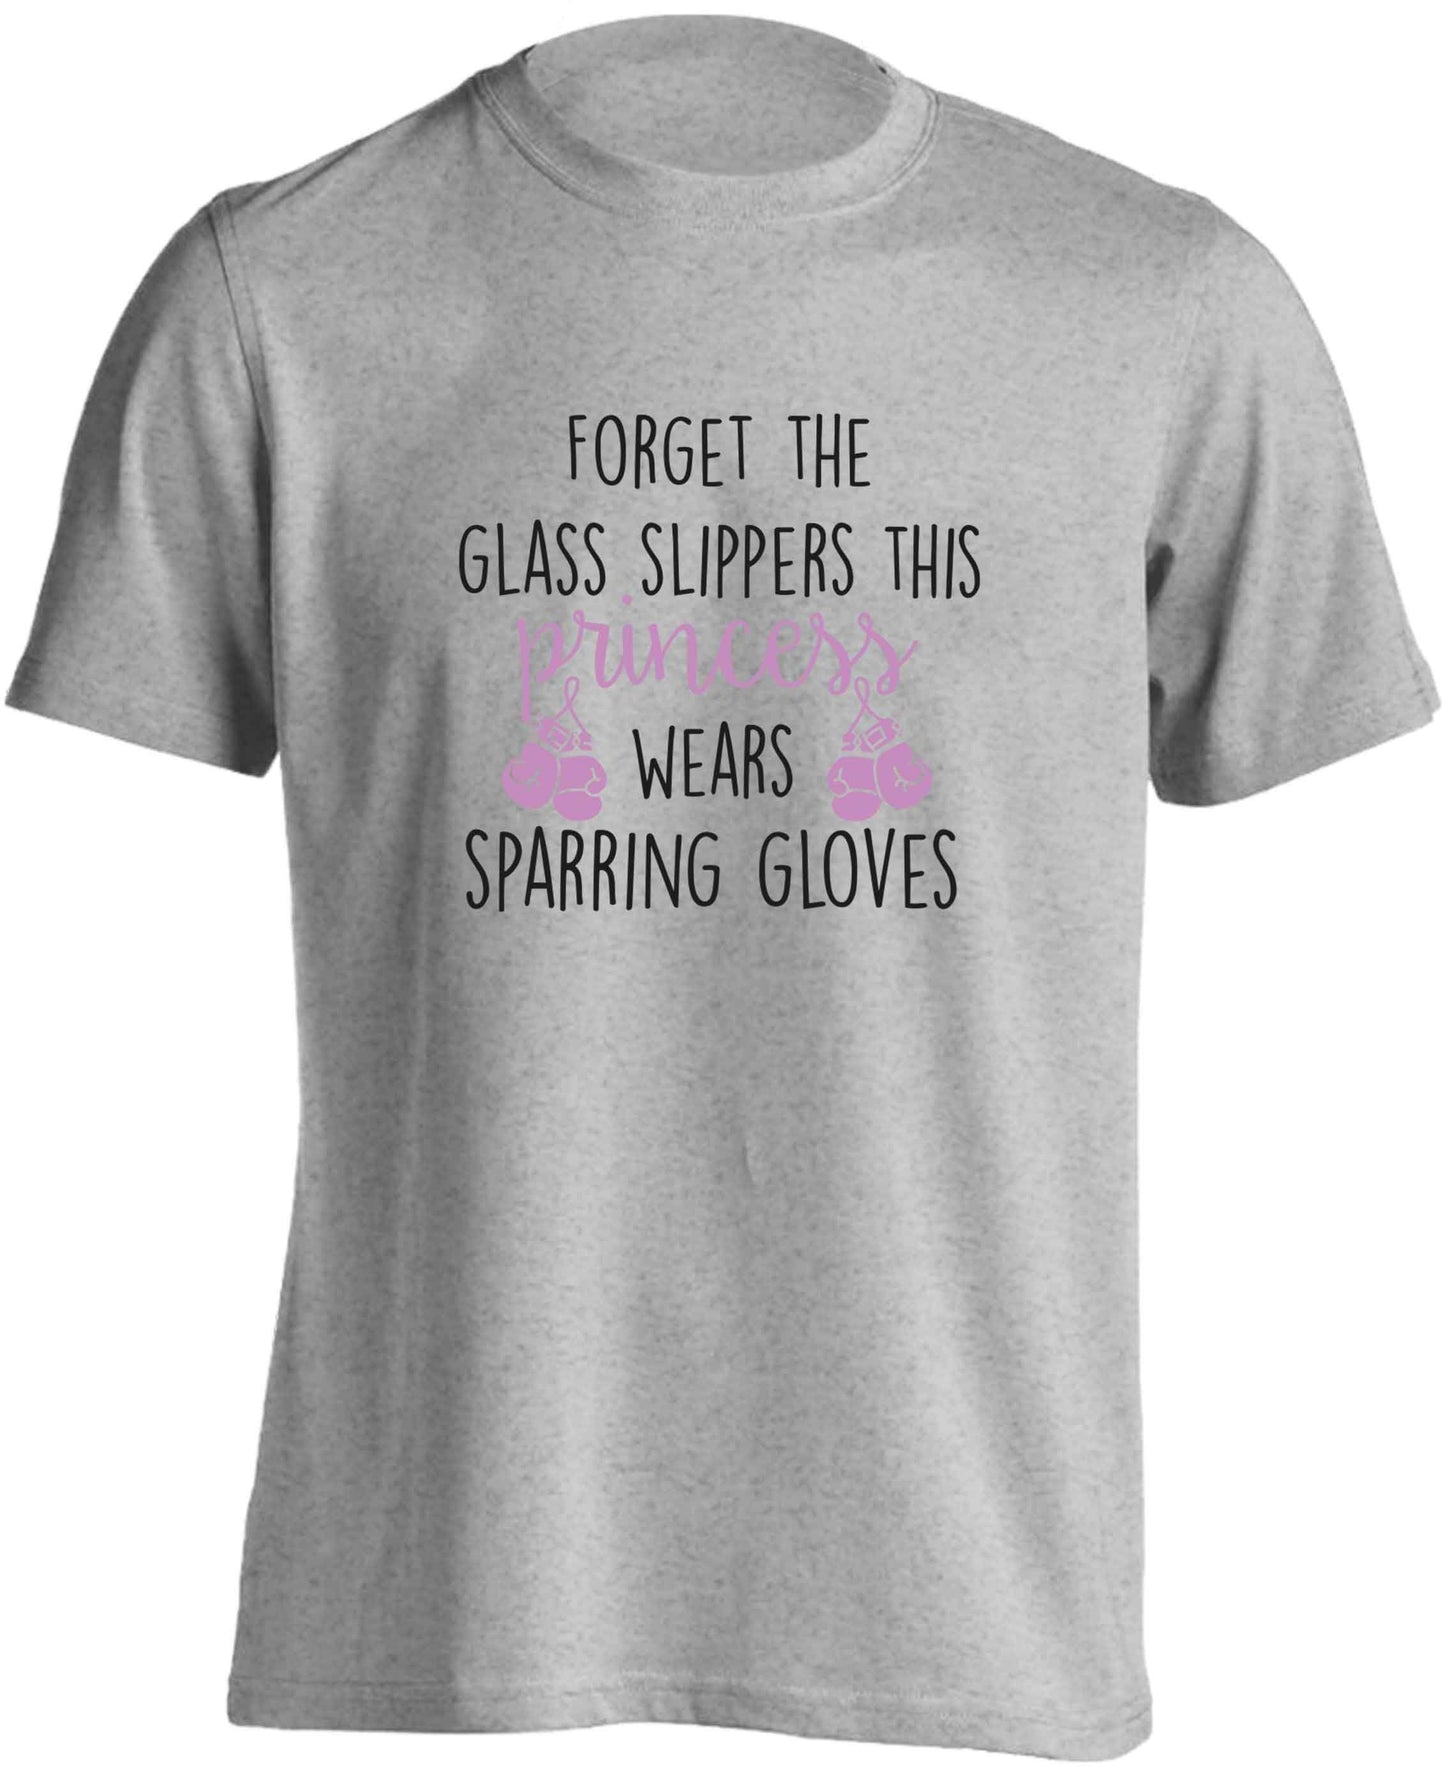 Forget the glass slippers this princess wears sparring gloves adults unisex grey Tshirt 2XL